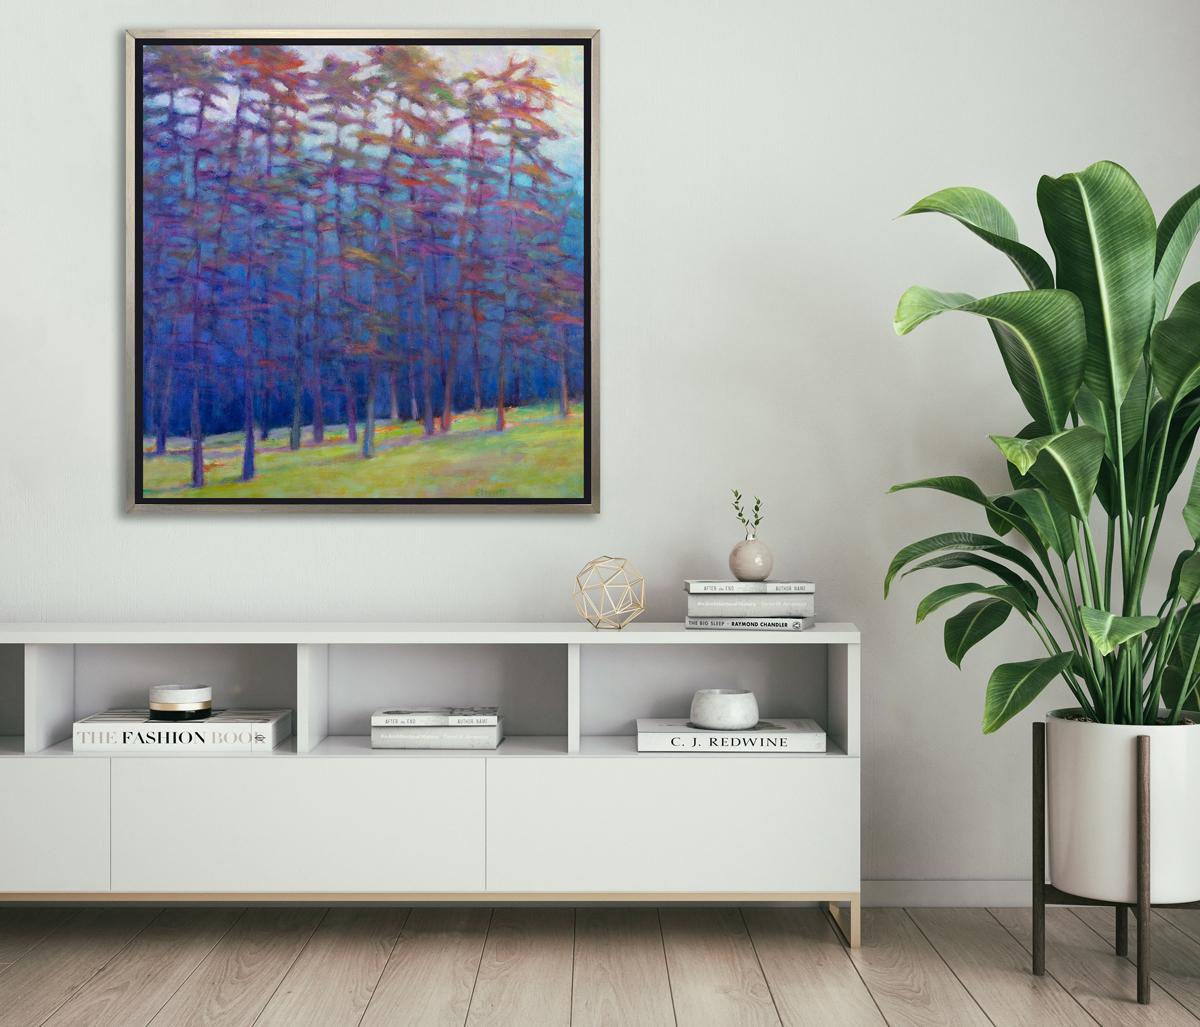 This abstract landscape limited edition print by Ken Elliott depicts an abstracted forestscape, with cool blue and violet trees and a yellow-green forest floor. The cool blues are contrasted by light, saturated dabs of warmer tones throughout,